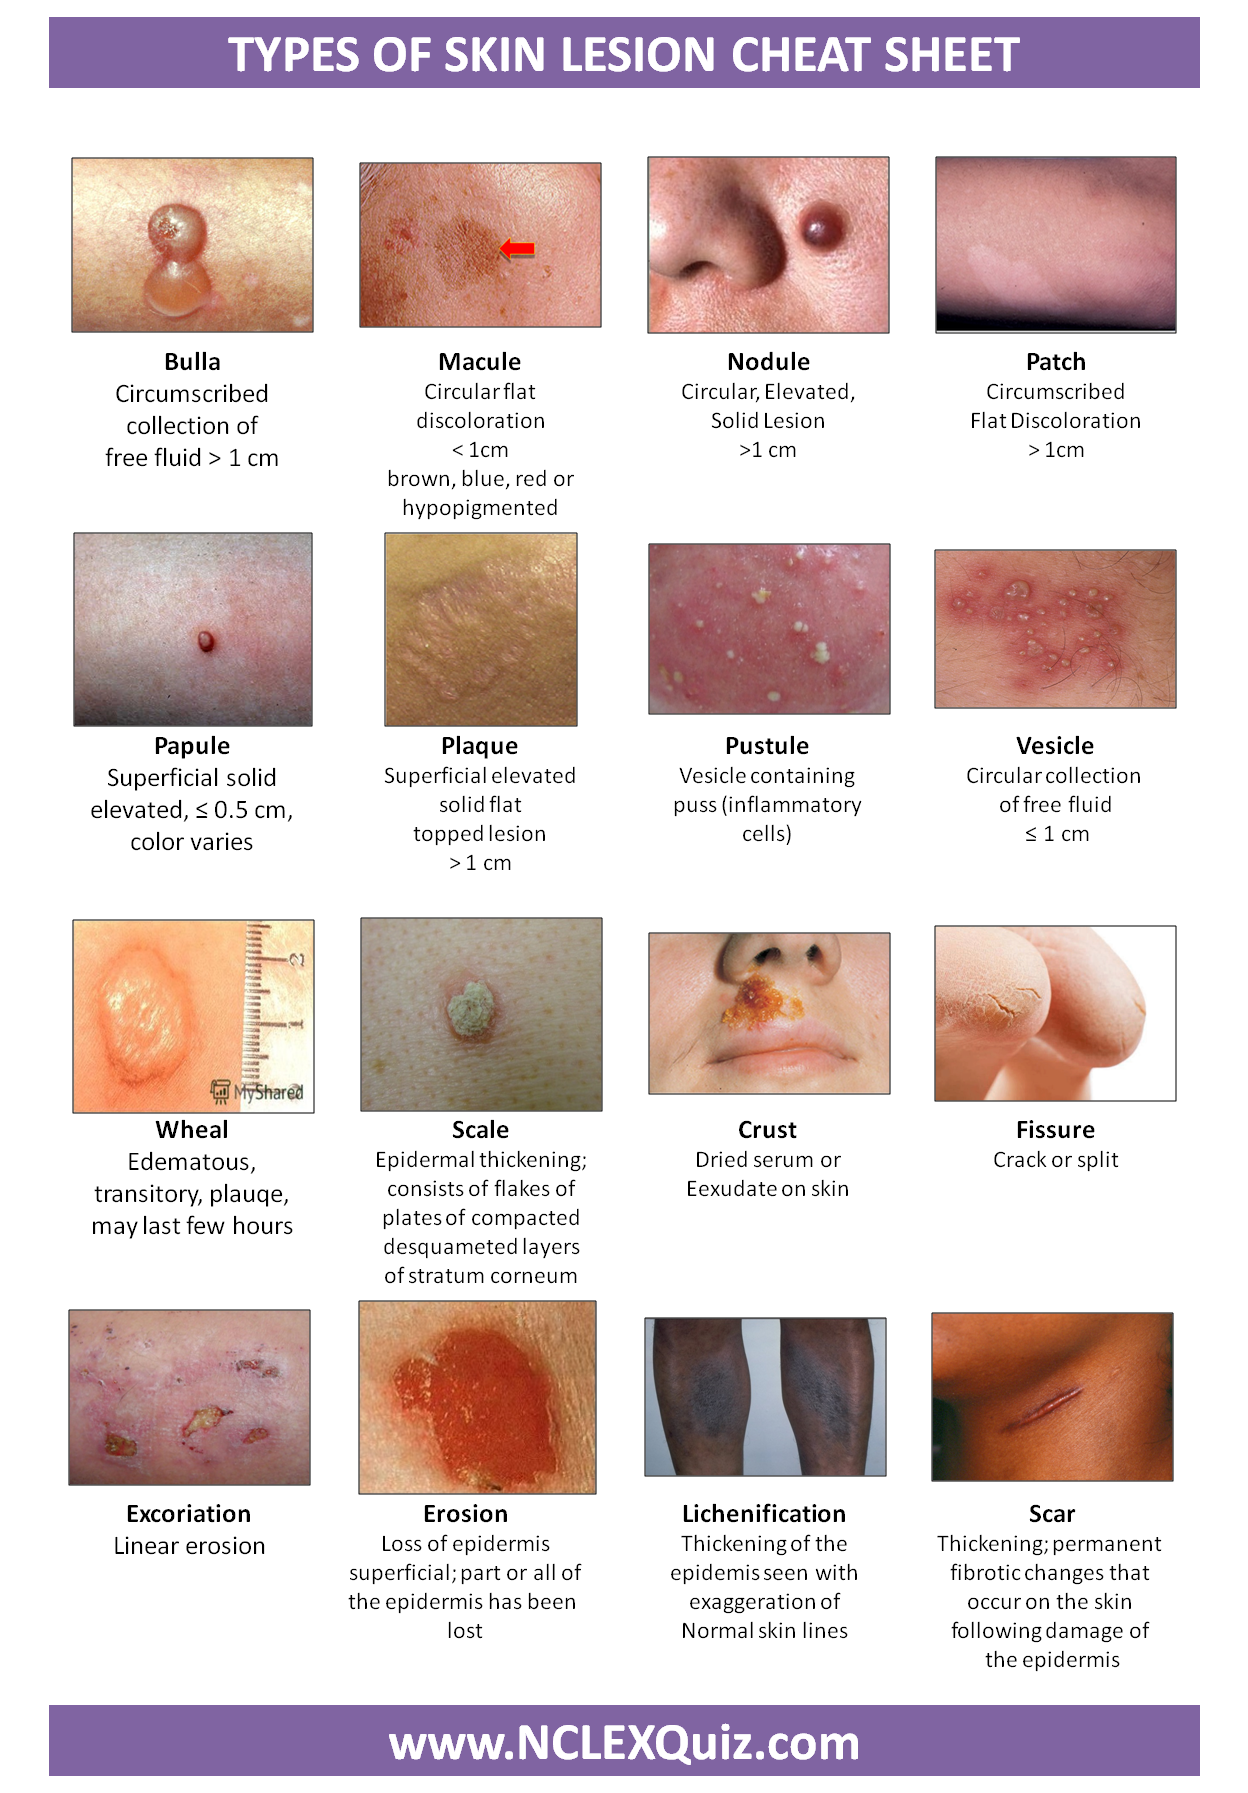 Types of Skin Lesion Cheat Sheet